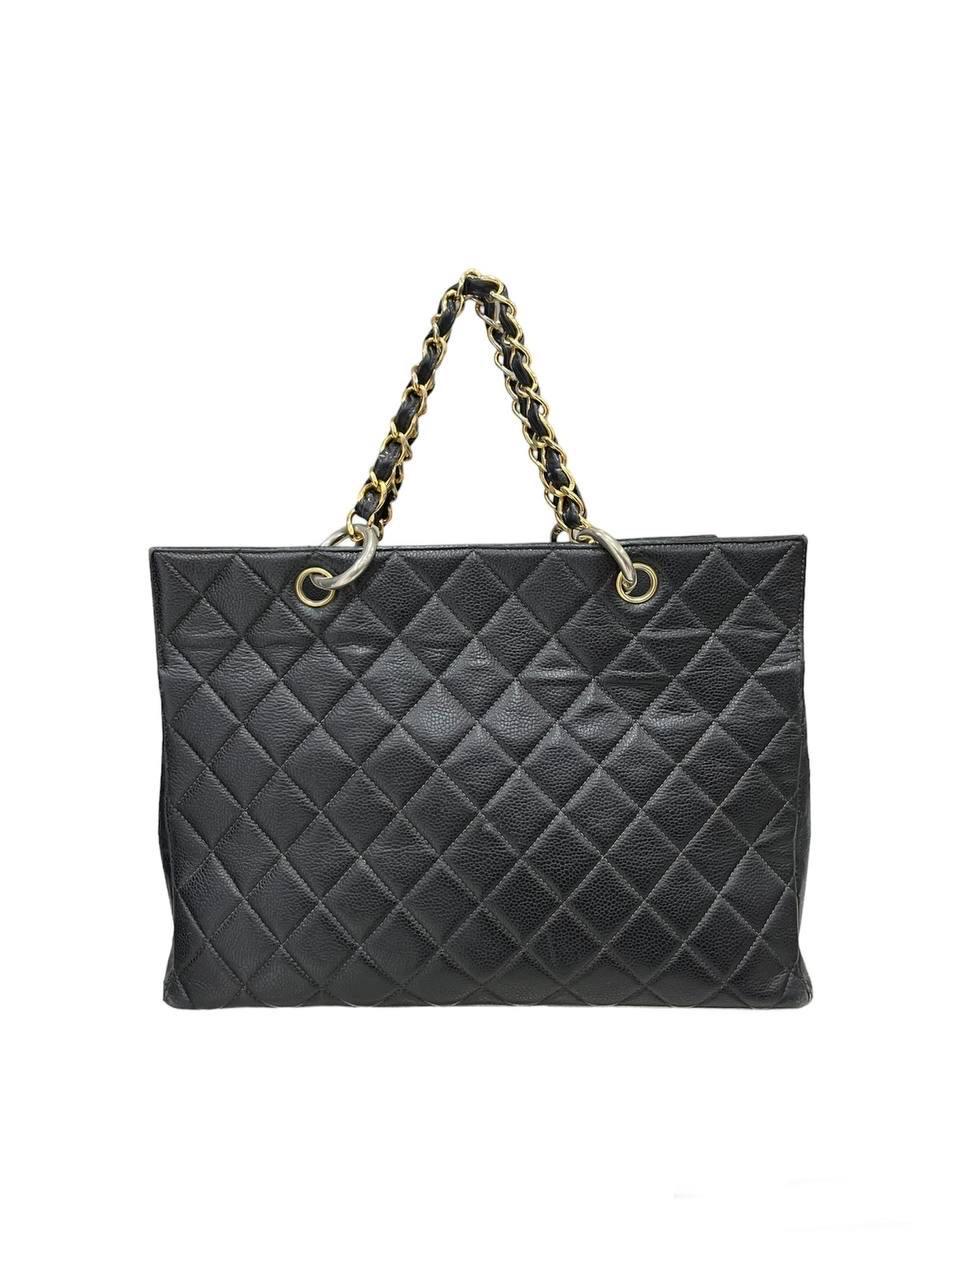 Women's 1990 Chanel GST Grand Shopping Tote Black Caviar Leather Top Handle Bag For Sale